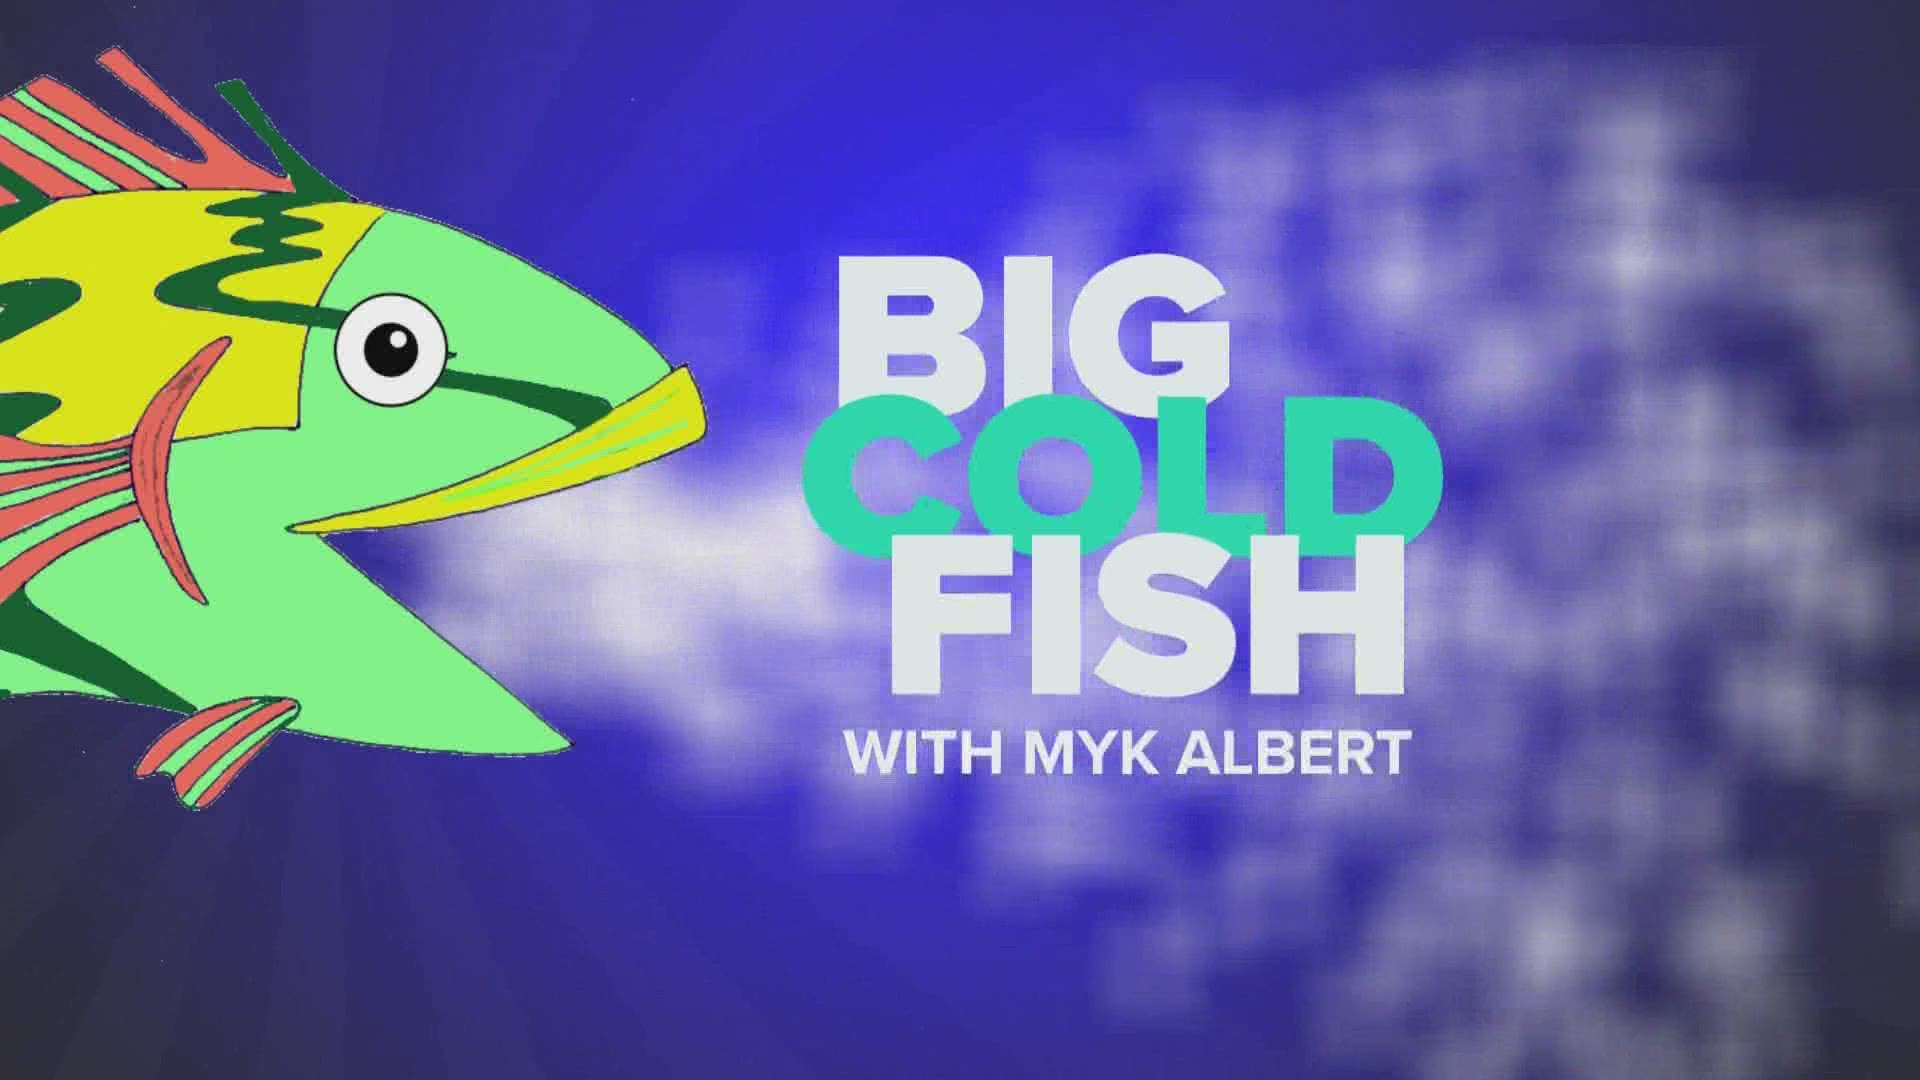 Big Cold Fish with Myk Albert, January 2, 2020. Back on the ice.